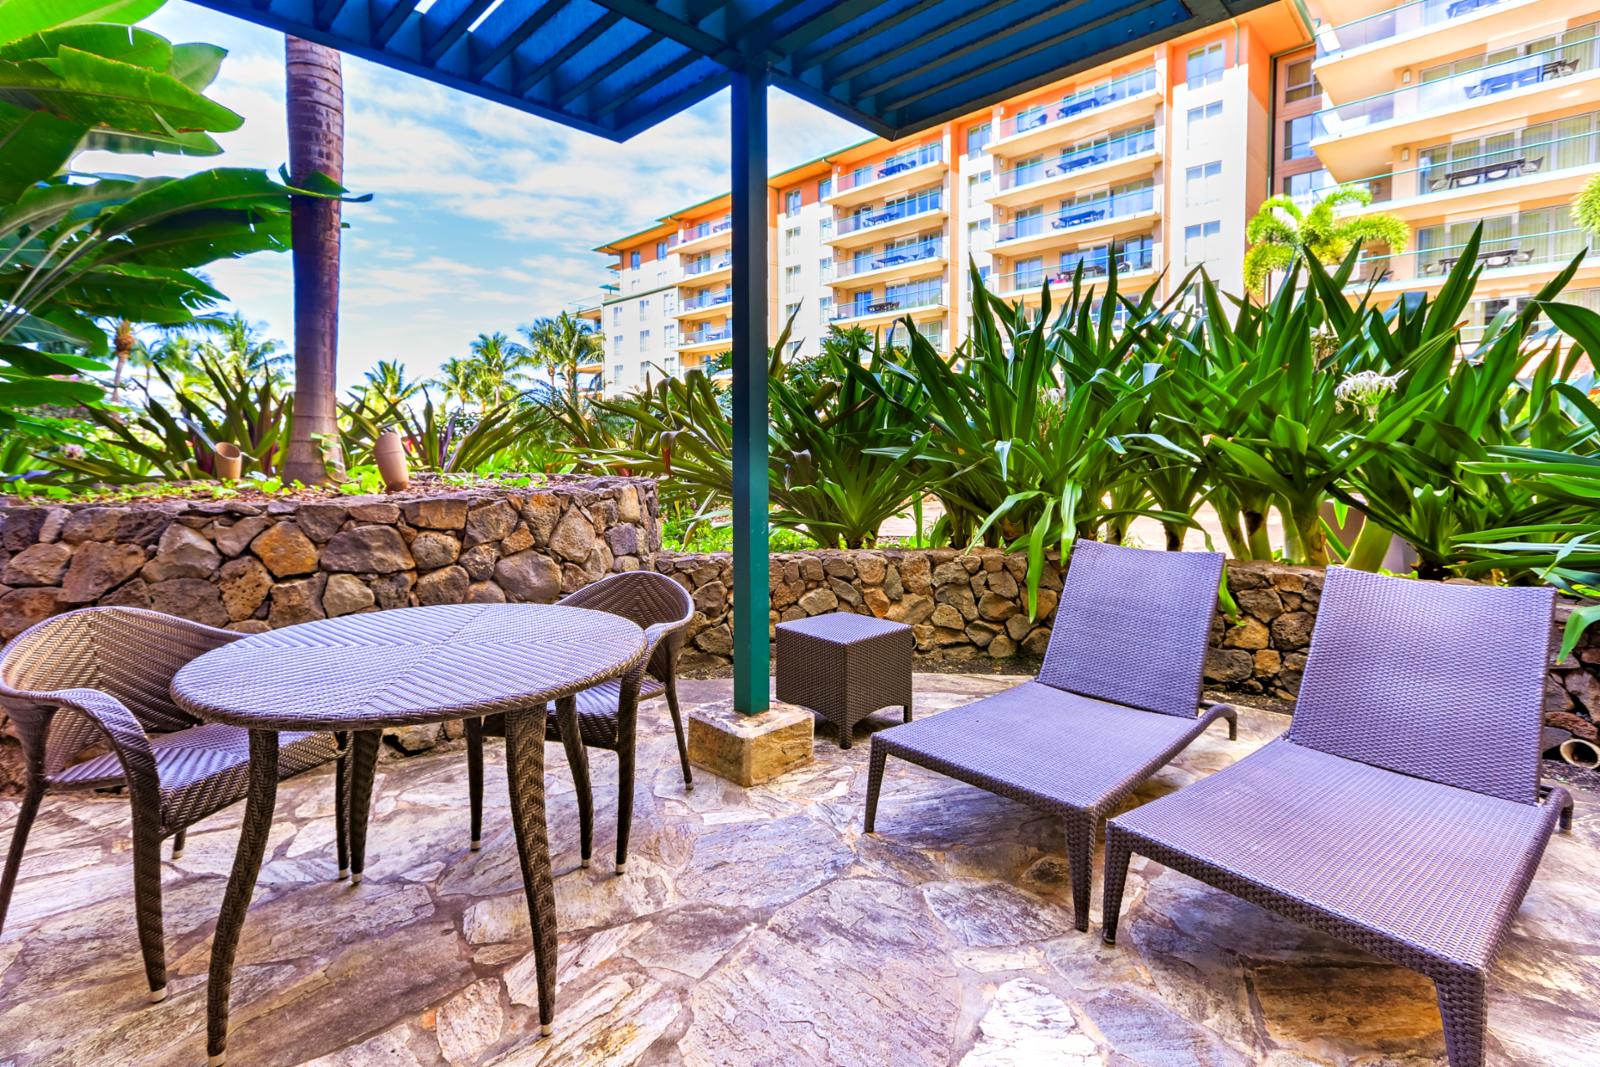 Your own private lanai with garden retreat!